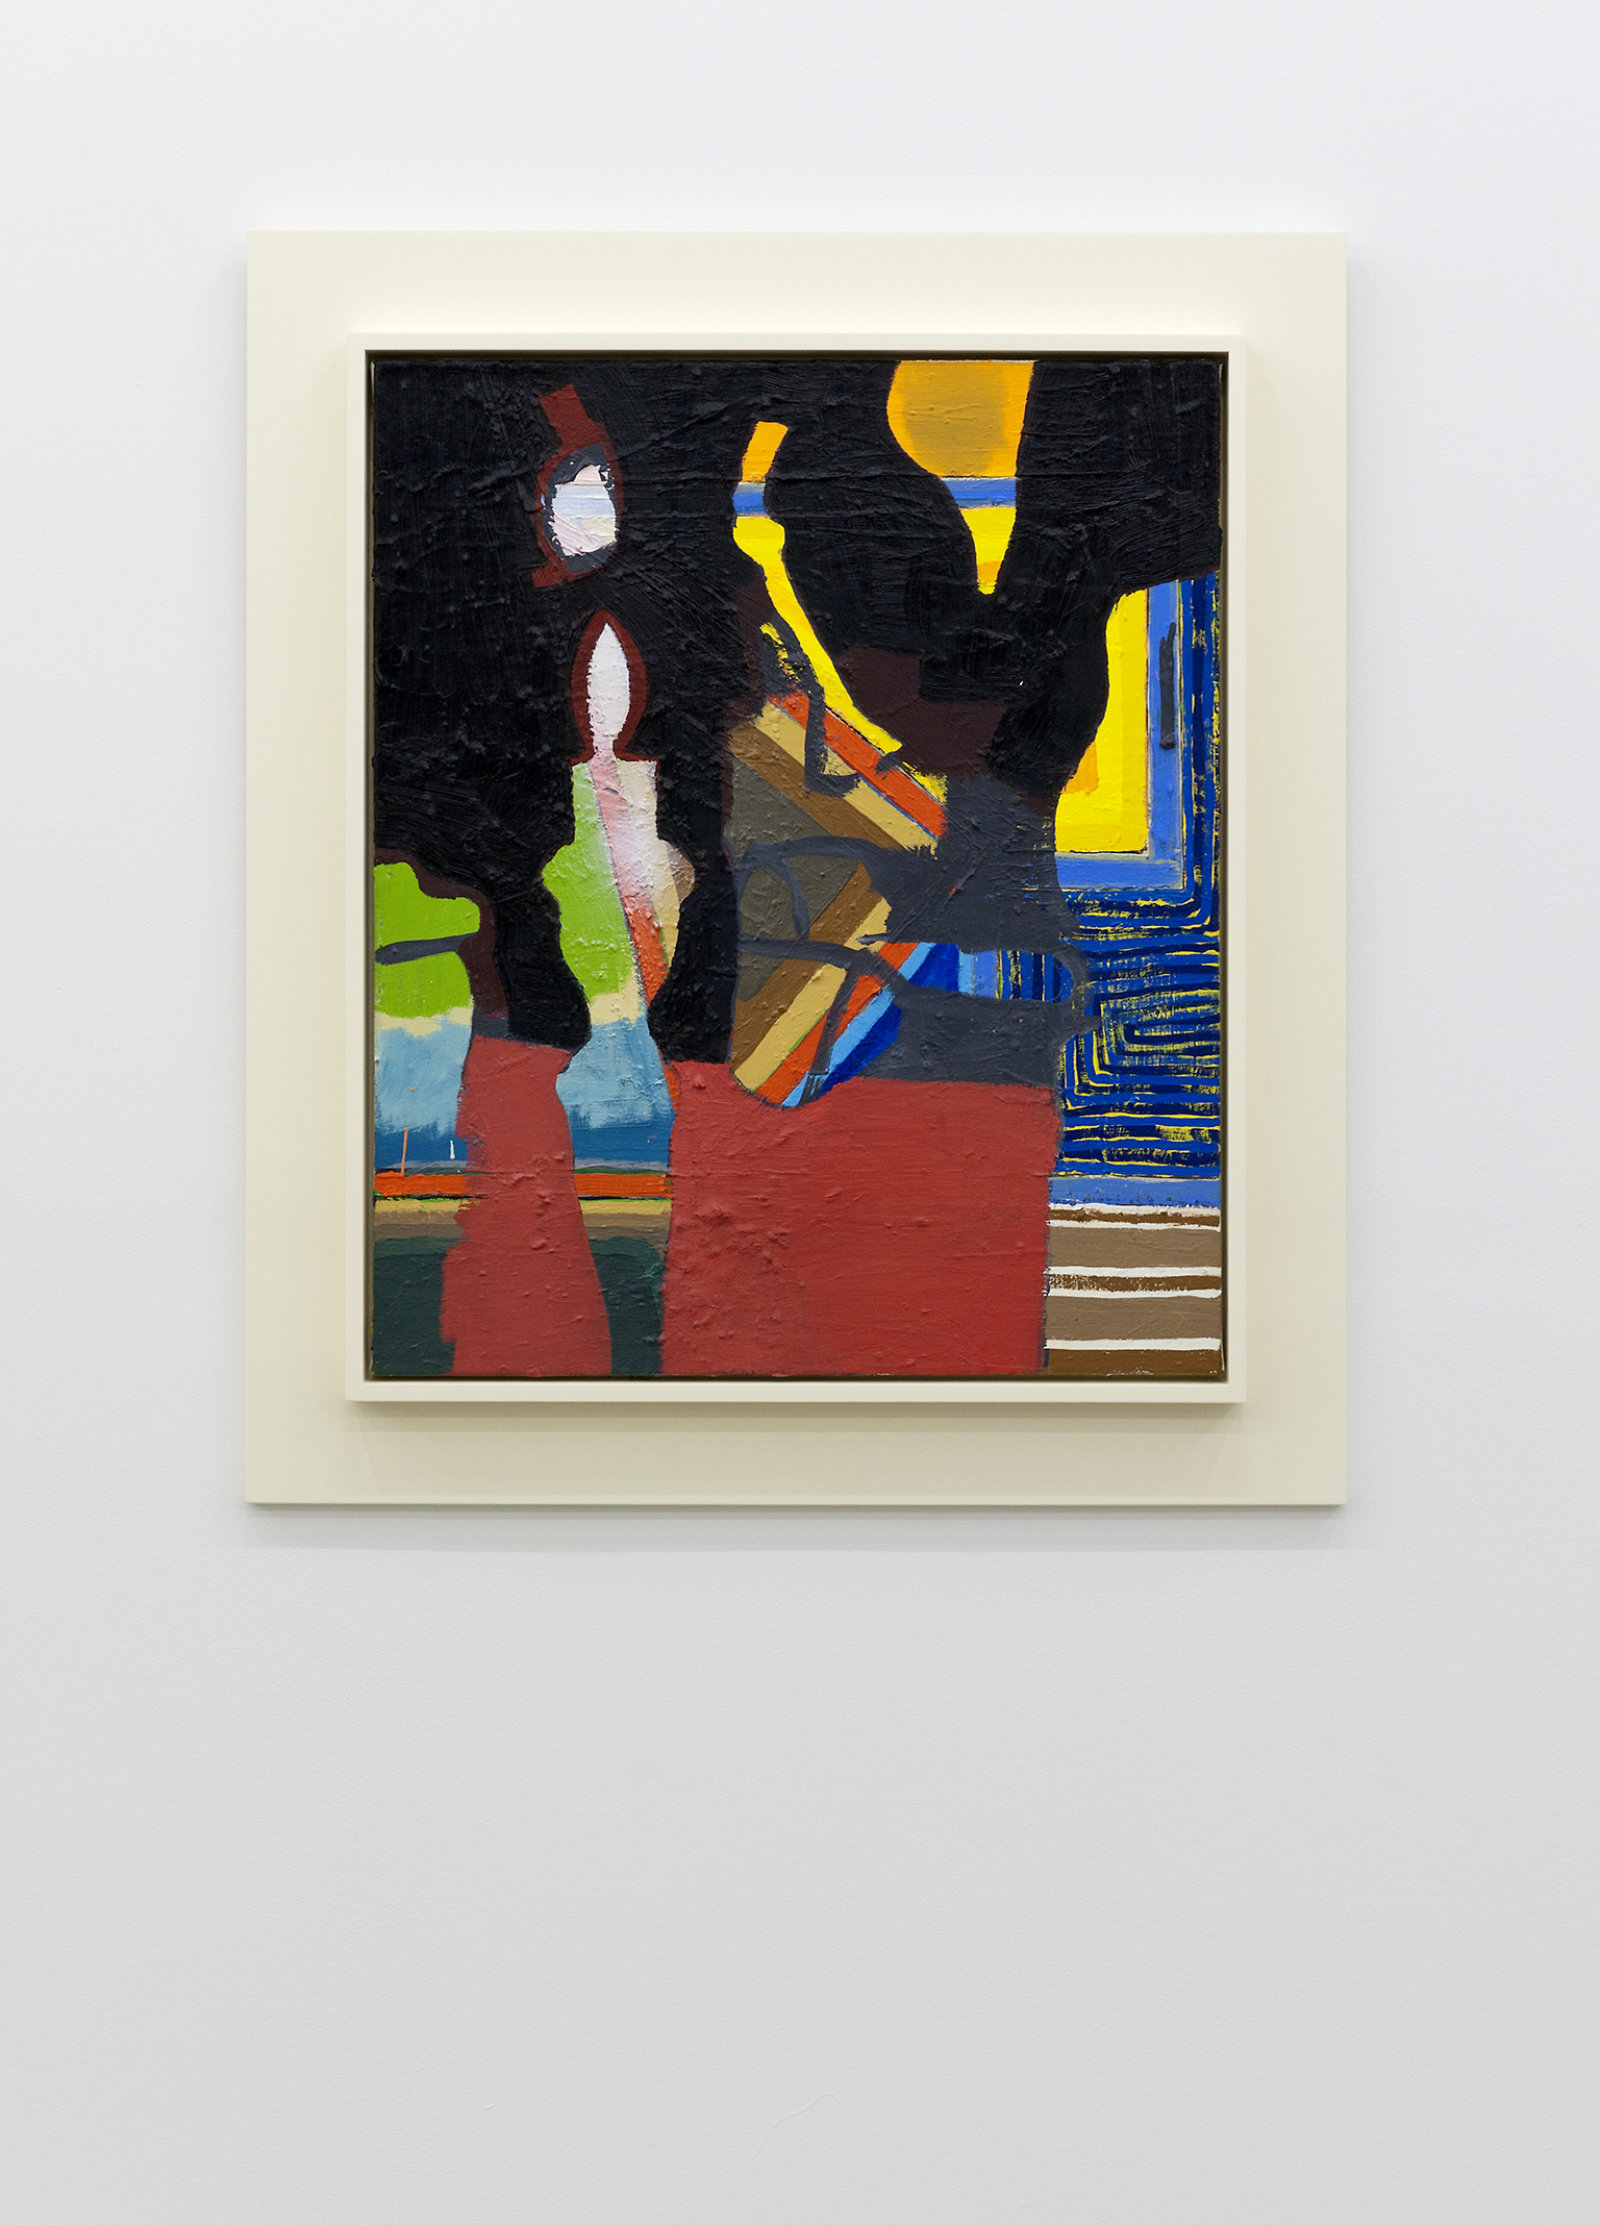 Damian Moppett, Candle #2, 2010, oil and spray enamel on canvas and wood frame, 36 x 32 in. (90 x 80 cm)